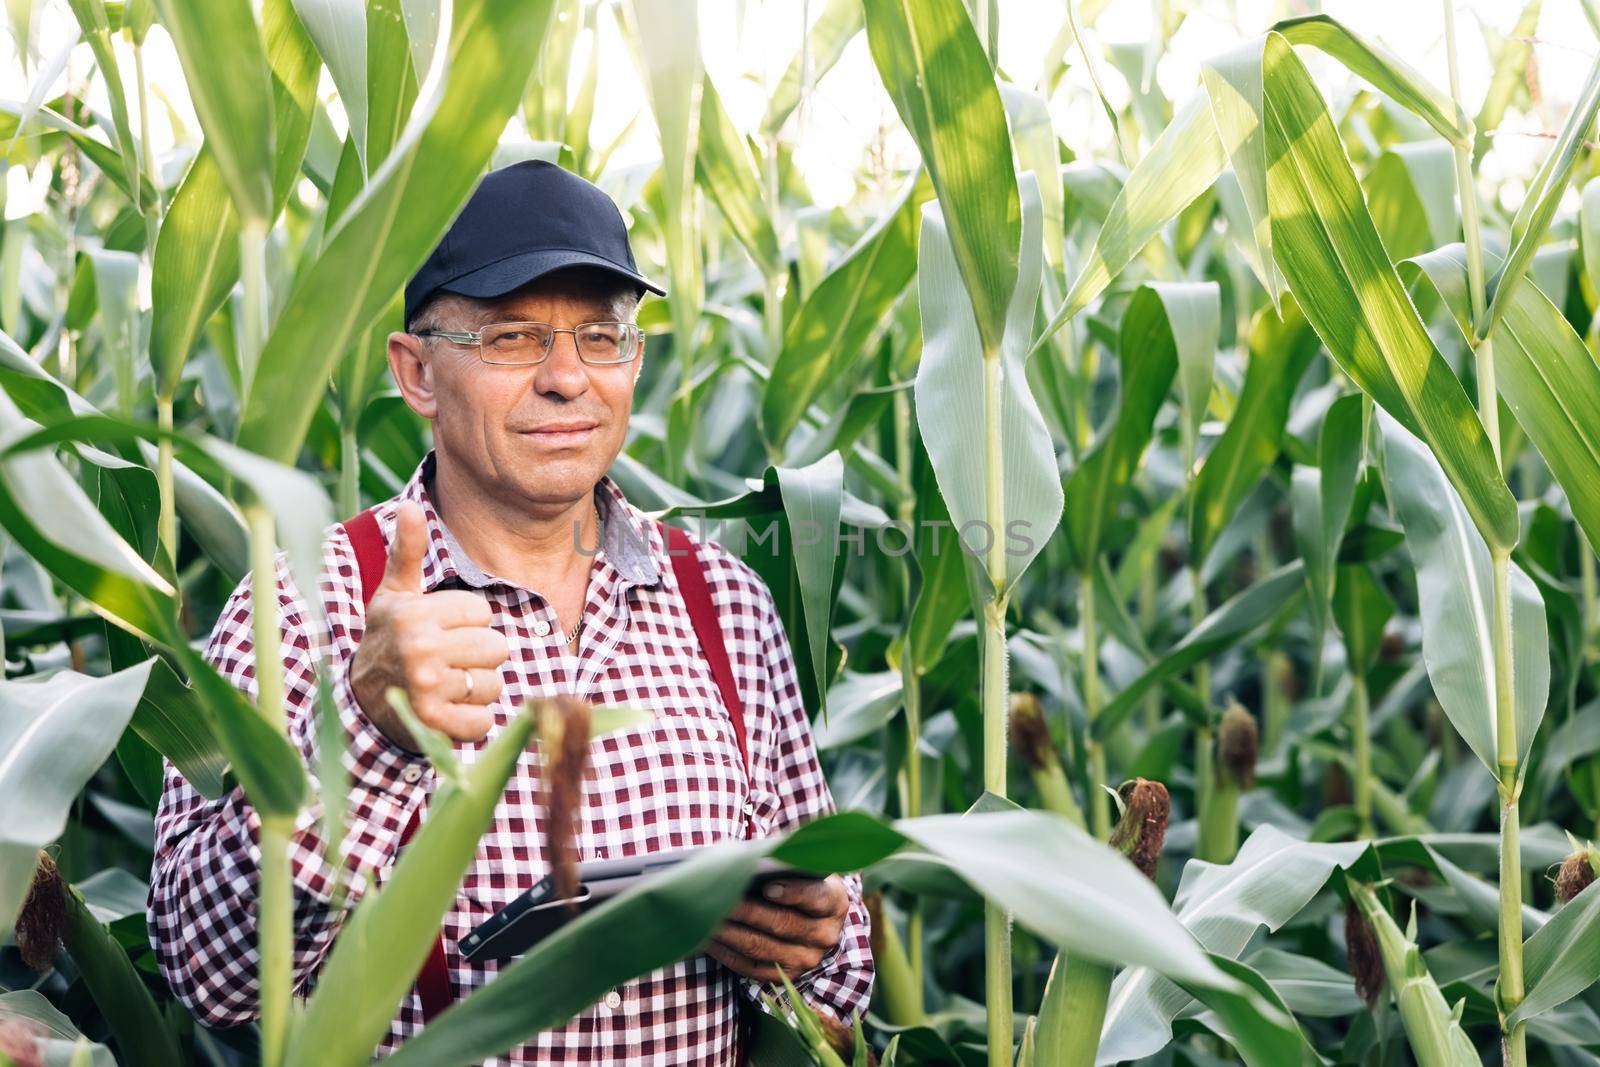 Portrait of caucasian senior man standing in green corn field, smiling cheerfully to camera and giving thumb up. Male farmer with smile outdoors in summer corn field.